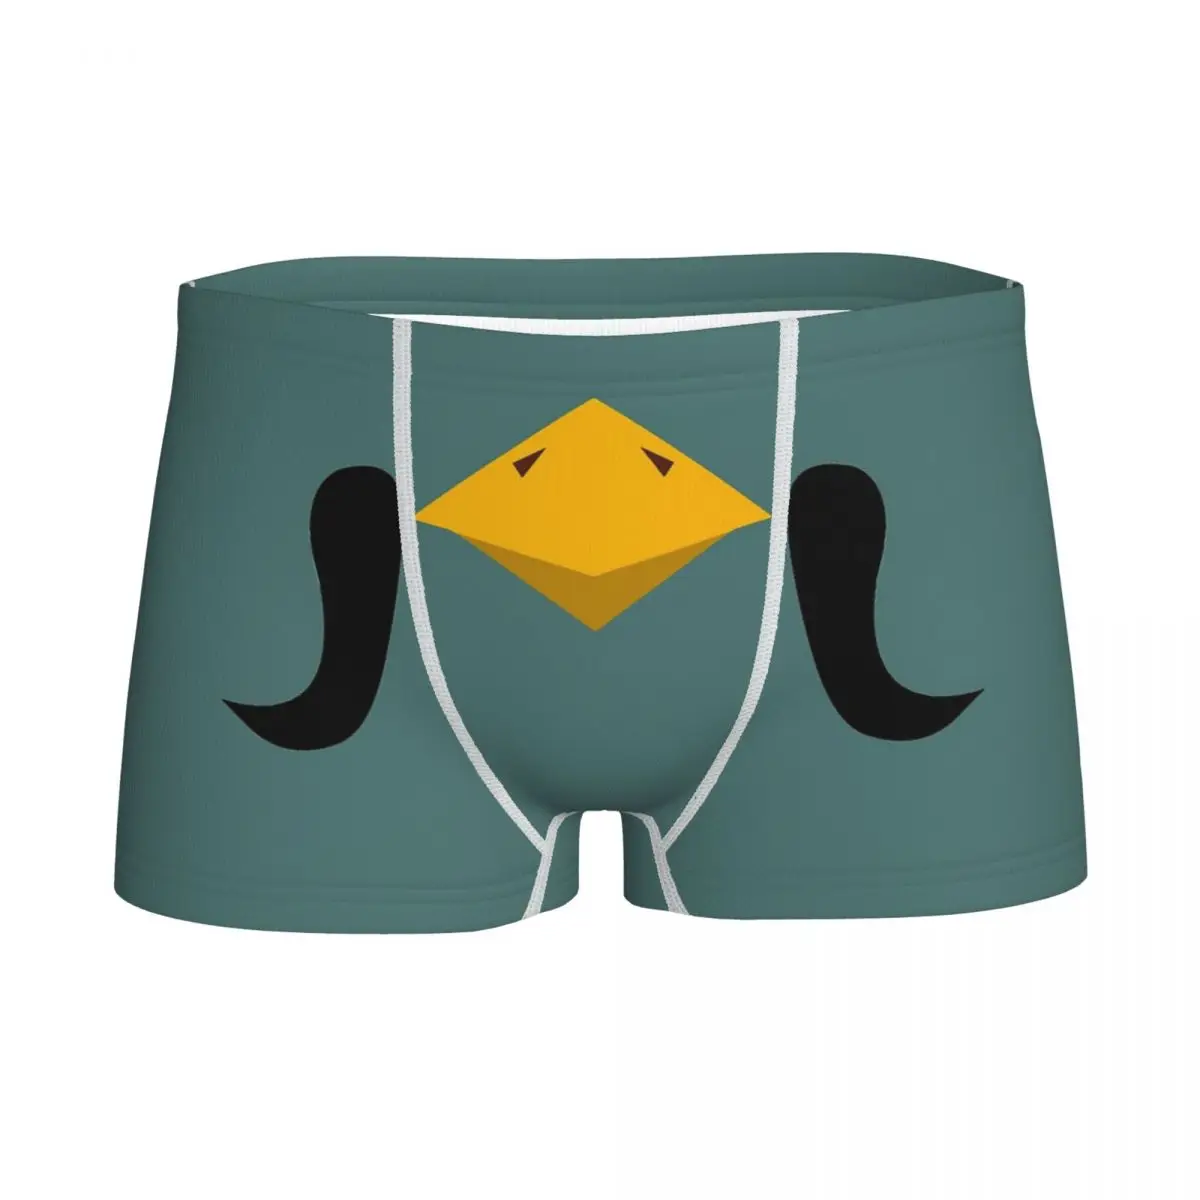 

Boys Brewster Animal Crossing Boxers Cotton Young Underwear Game Man Shorts Underpants Popularity Teenagers Underpants